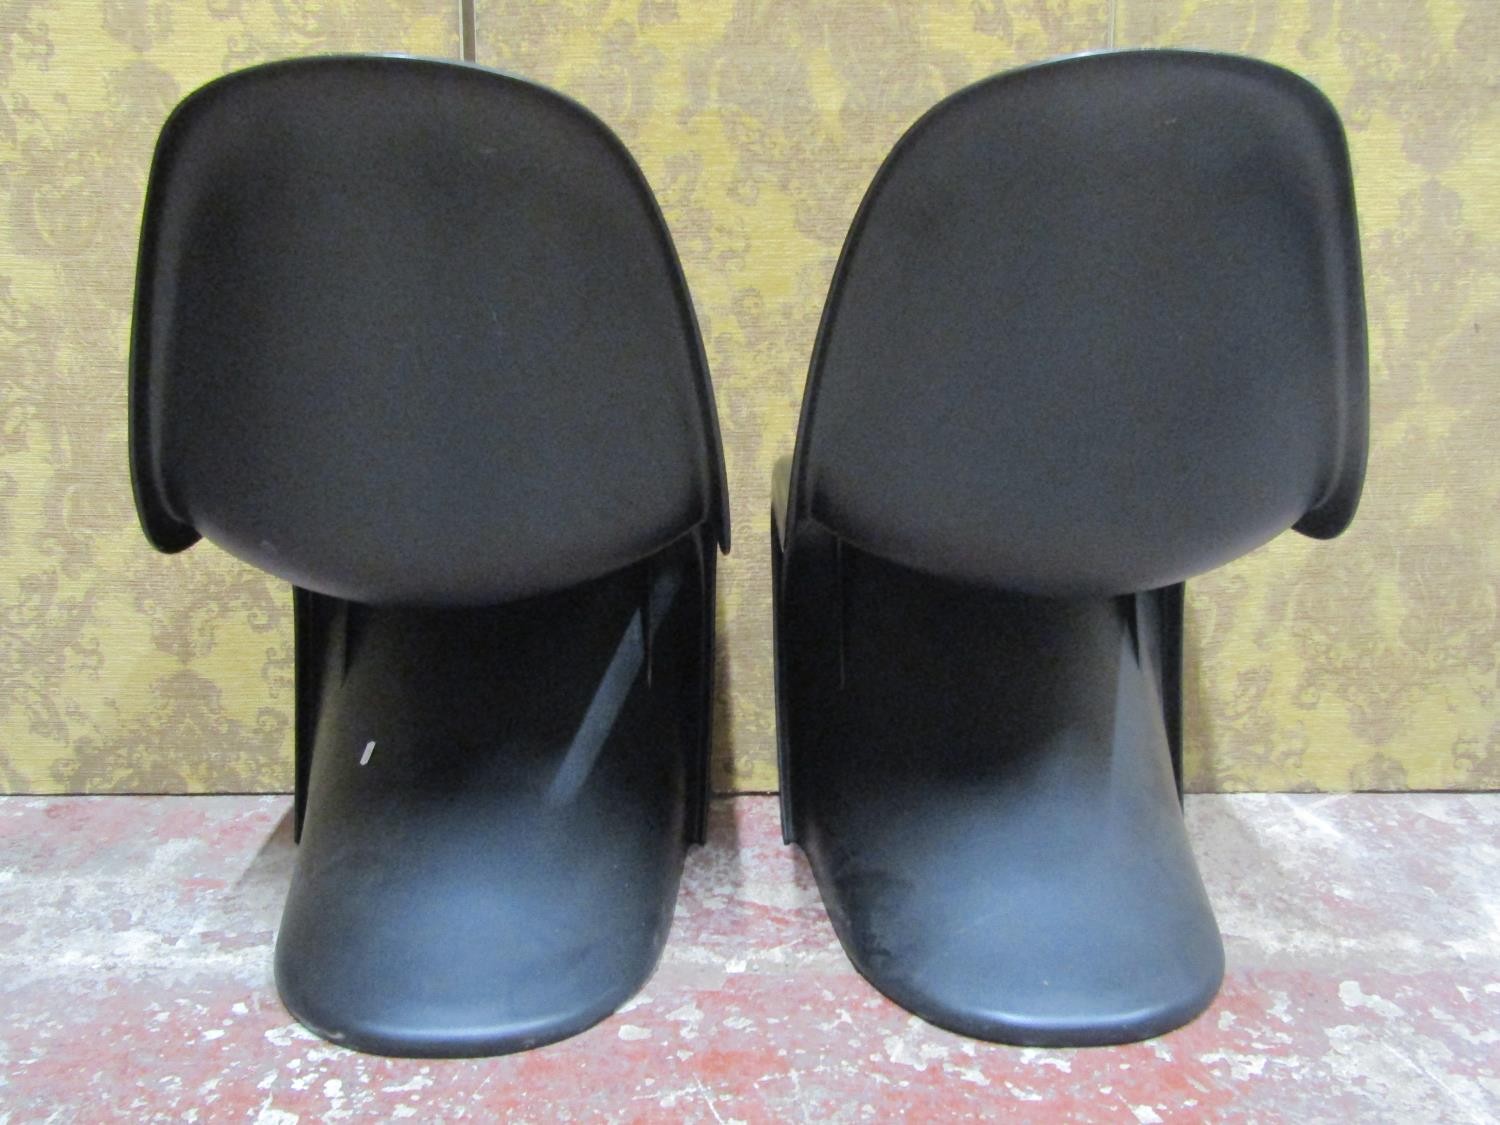 A pair of contemporary moulded plastic cantilever chairs in a black colourway in stacking format - Image 6 of 6